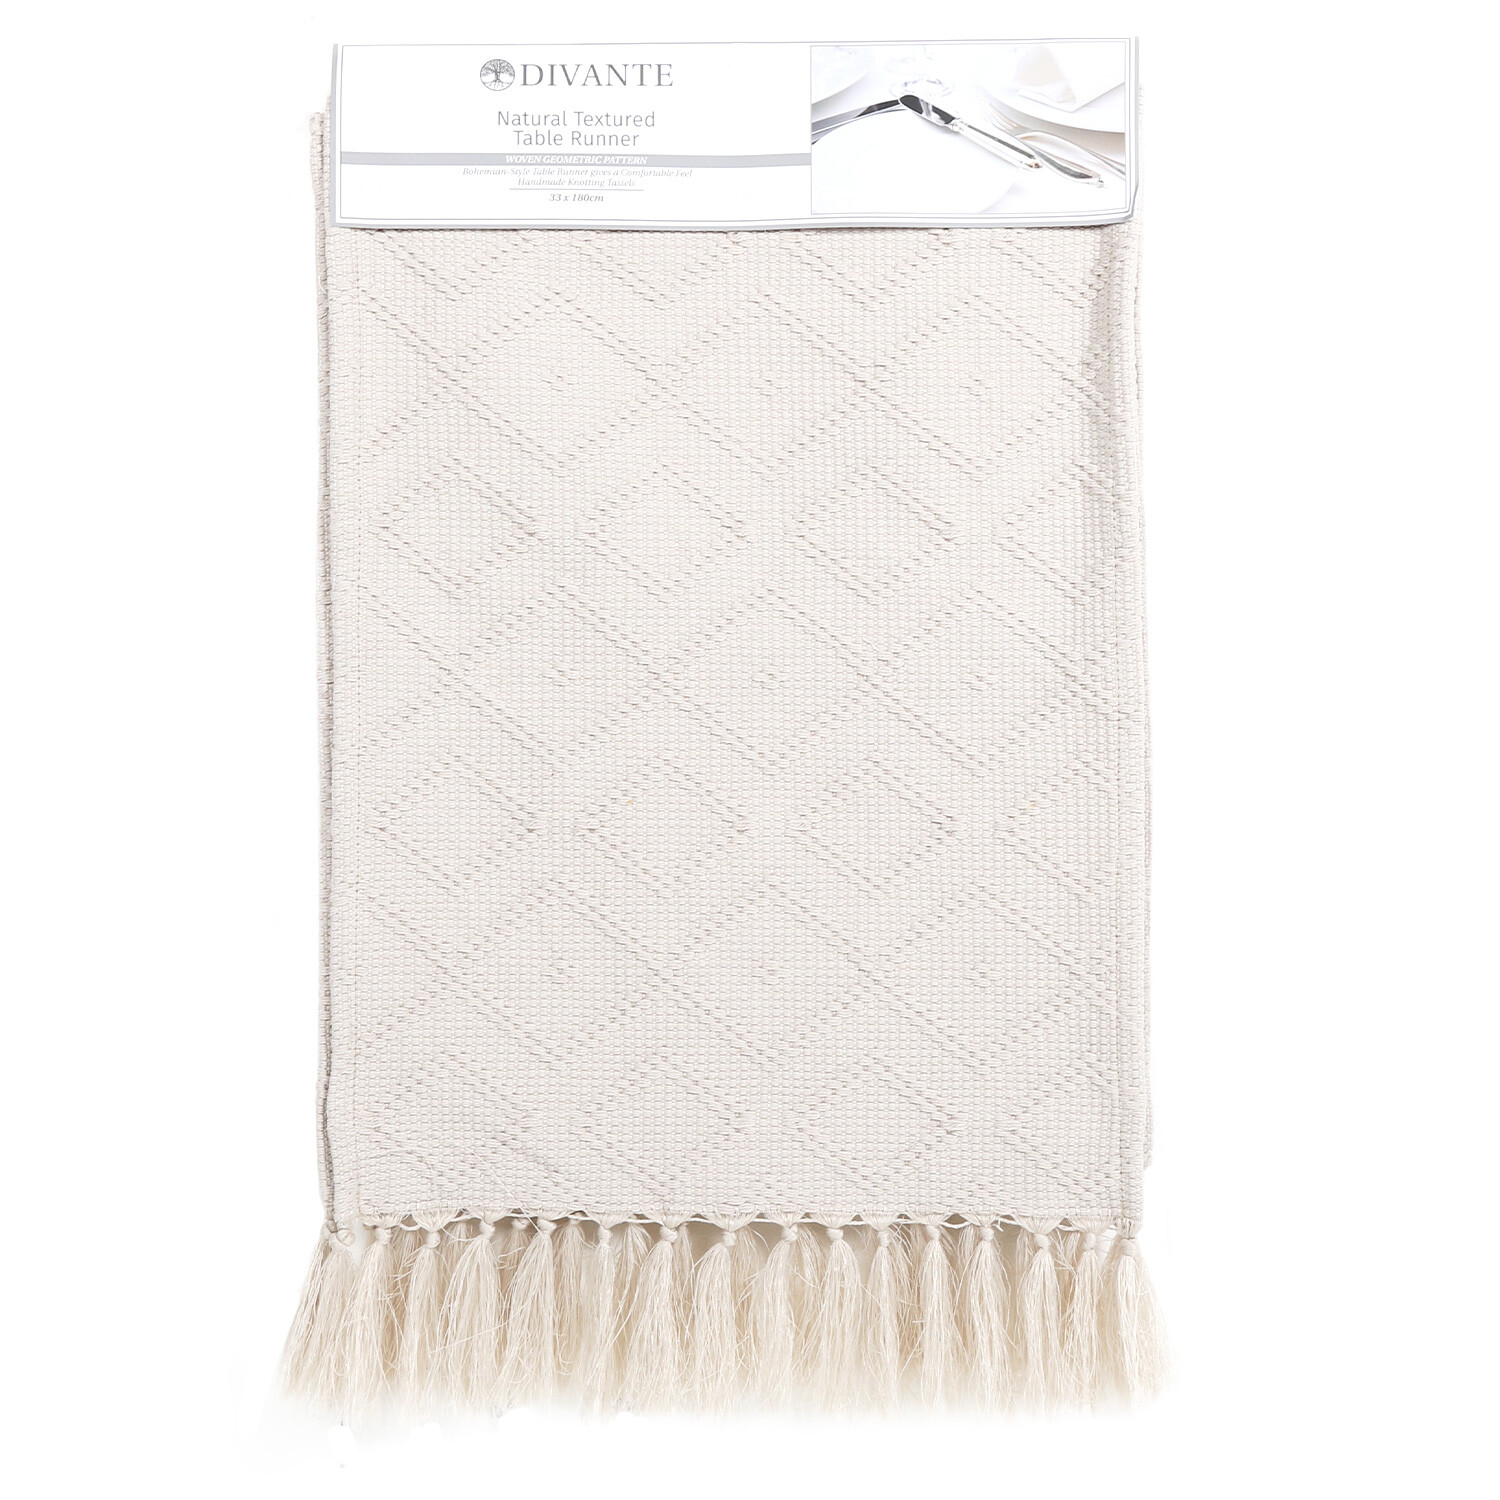 Divante Polyester Natural Texture Table Runner 180 x 33cm Image 1